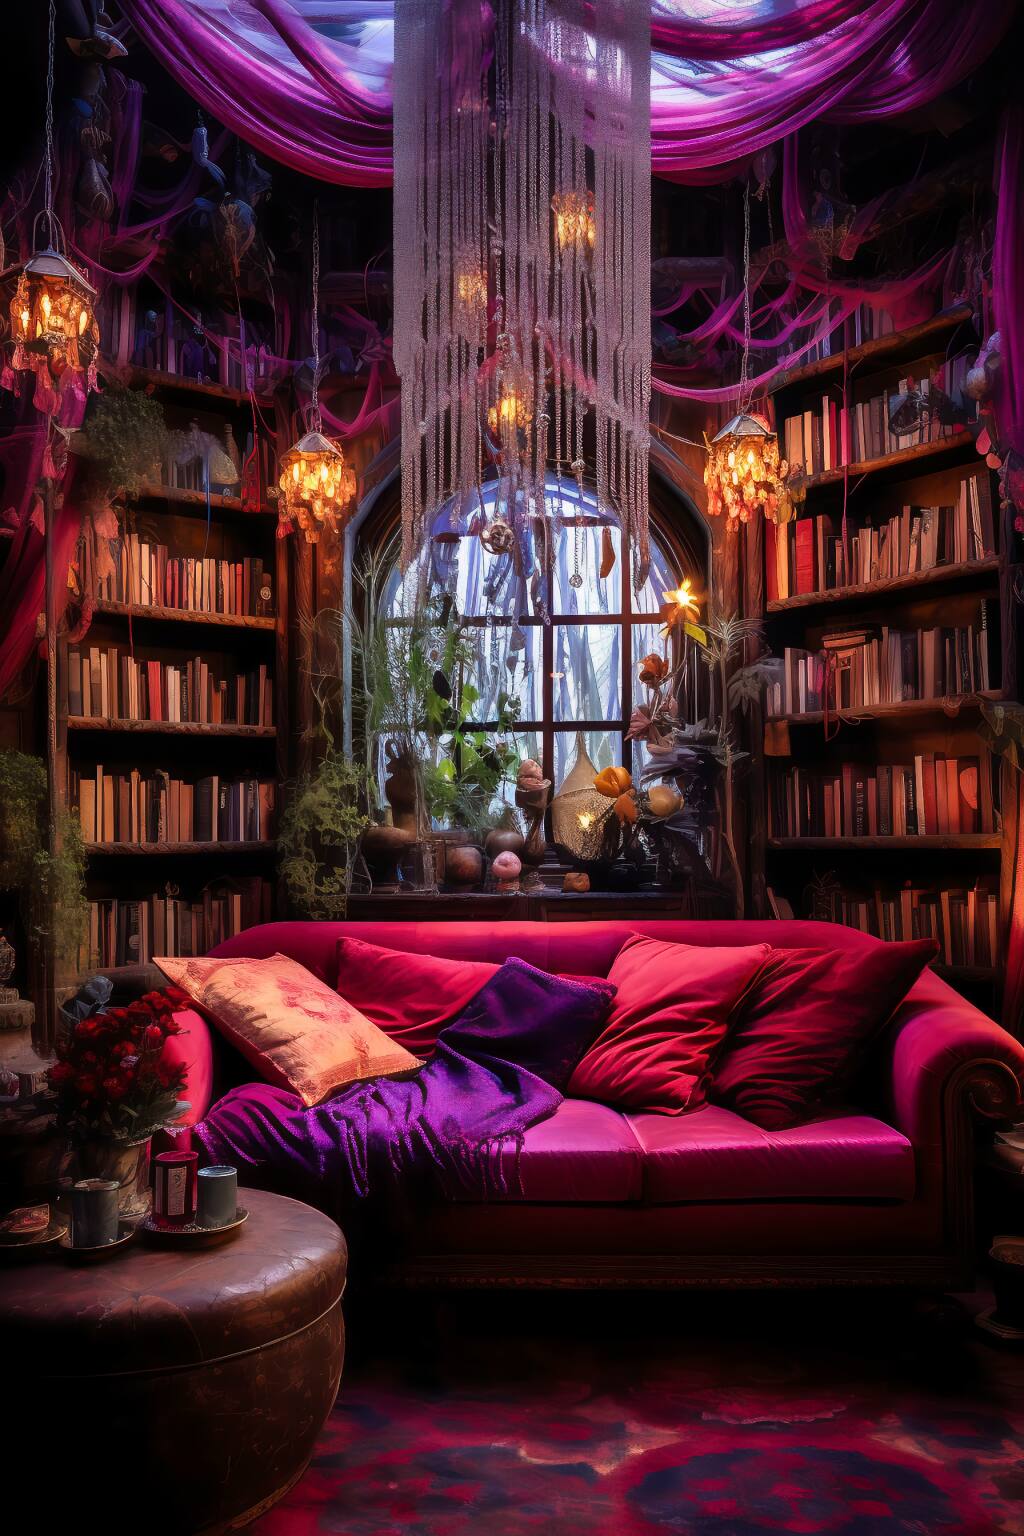 Bohemian Living Room In Purple And Magenta, Featuring A Velvet Chaise Lounge, Ornate Bookshelves, And Dreamcatchers.